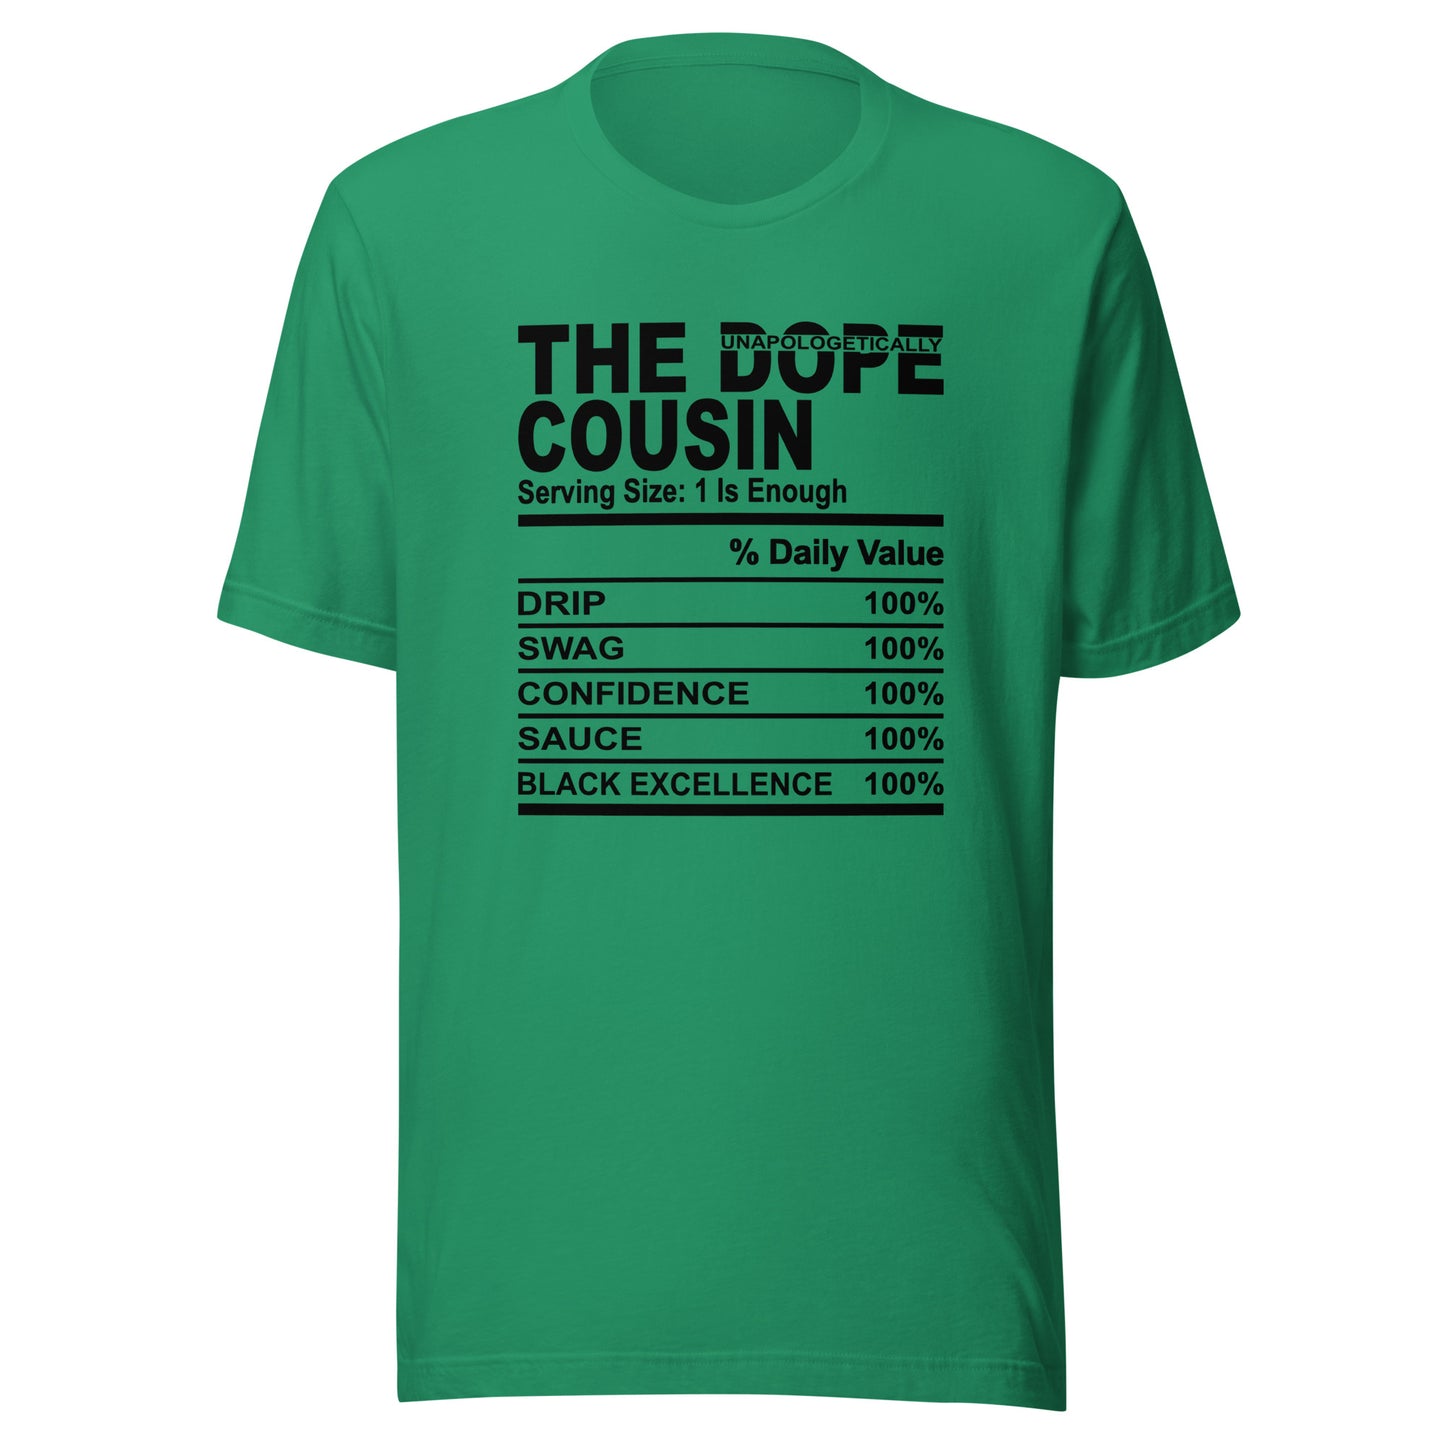 THE DOPE COUSIN (Unapologetically) - 4XL - Unisex T-Shirt (black print)